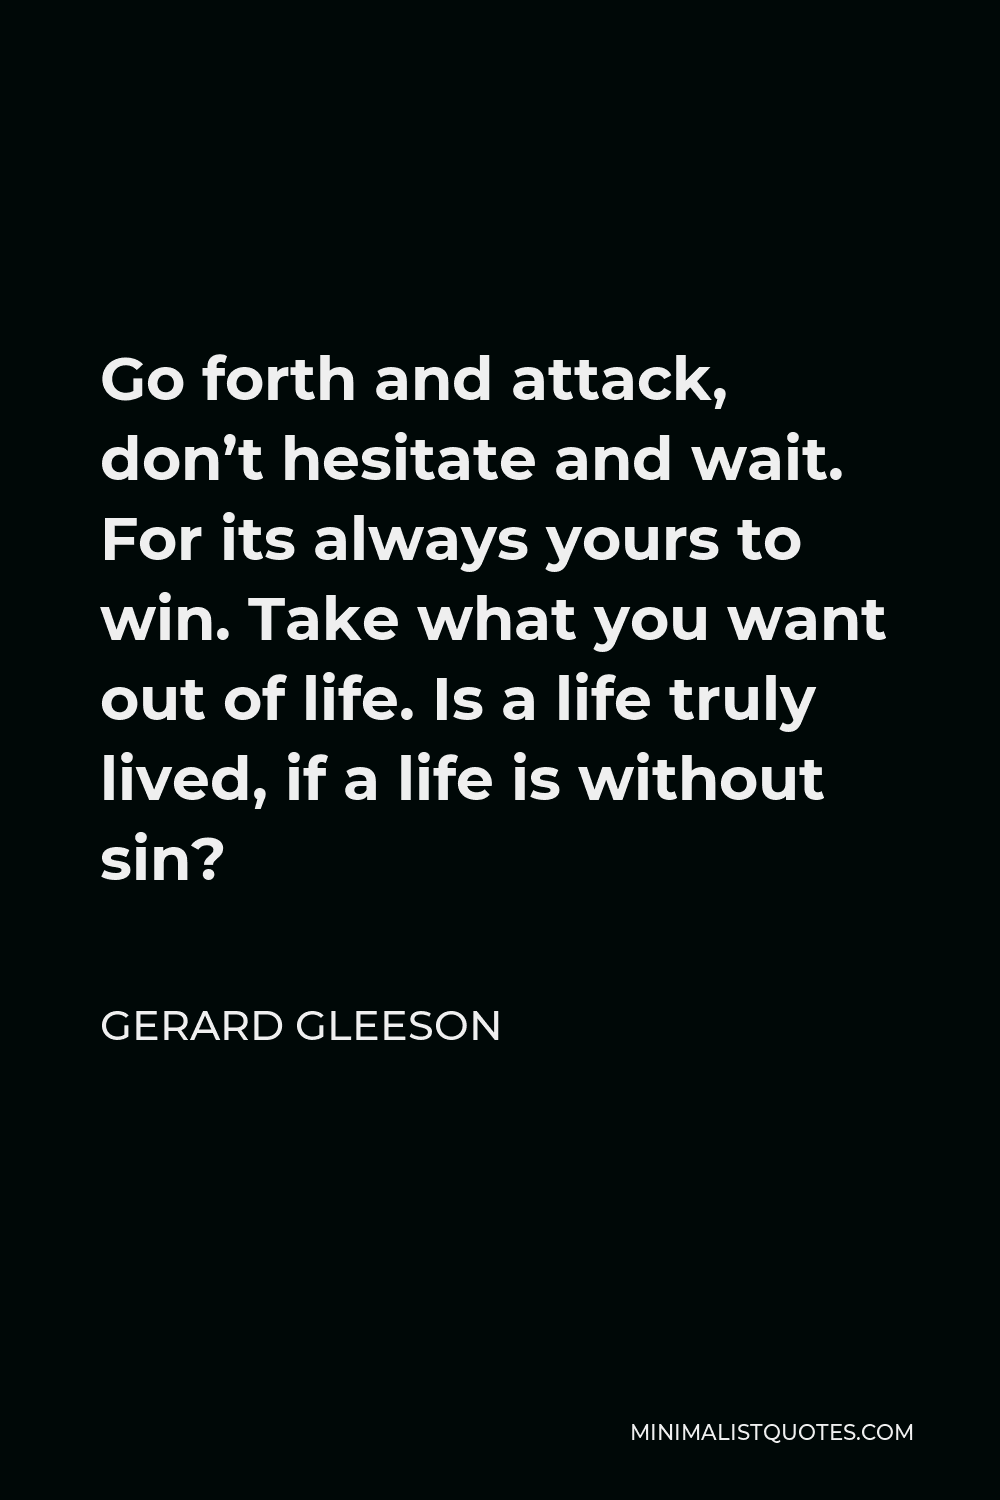 Gerard Gleeson Quote - Go forth and attack, don’t hesitate and wait. For its always yours to win. Take what you want out of life. Is a life truly lived, if a life is without sin?